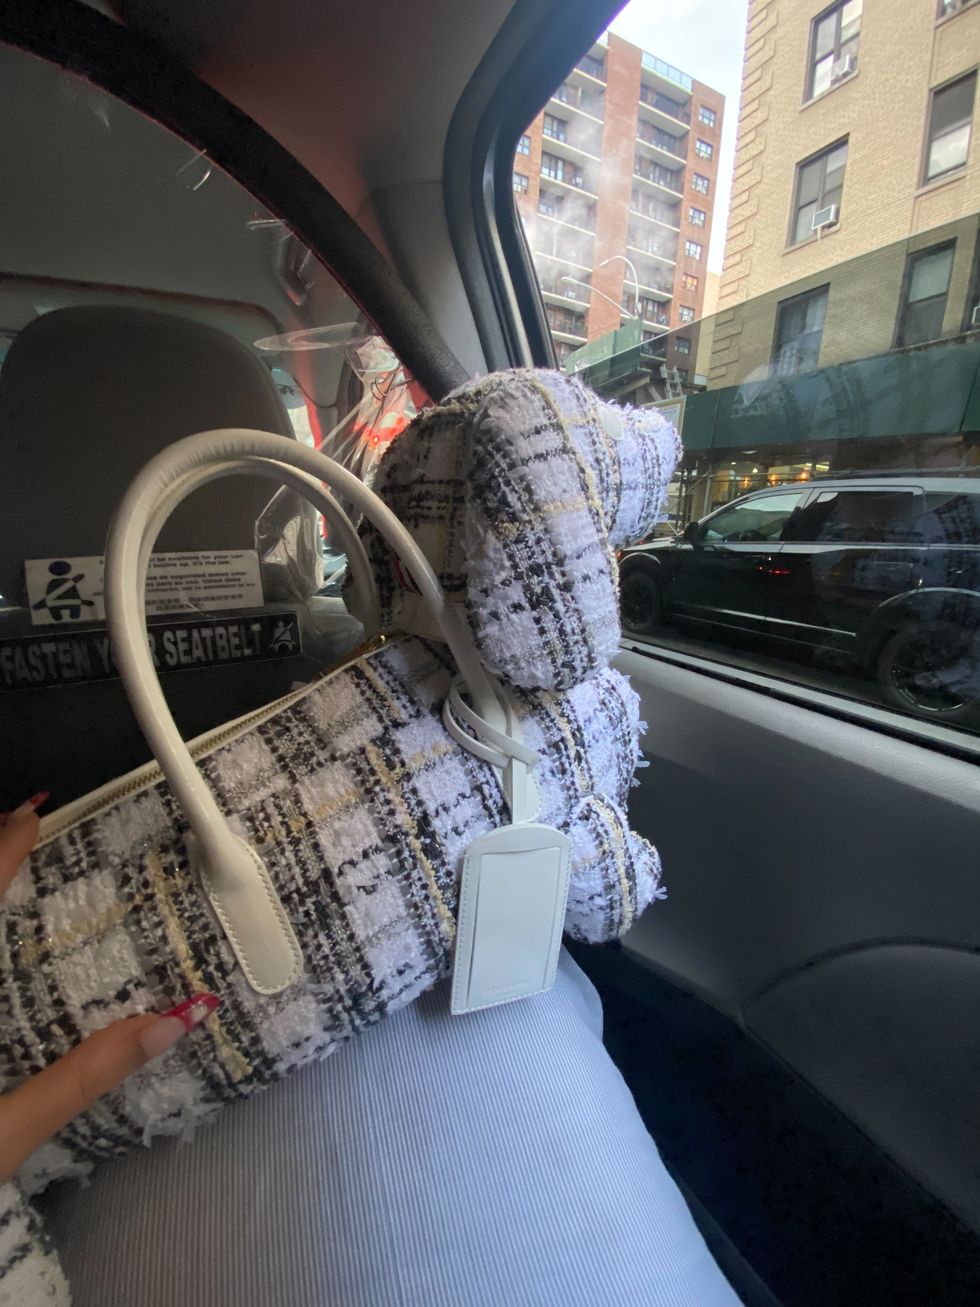 I Wore Six Animal-Shaped Bags to New York Fashion Week and This is What  Happened